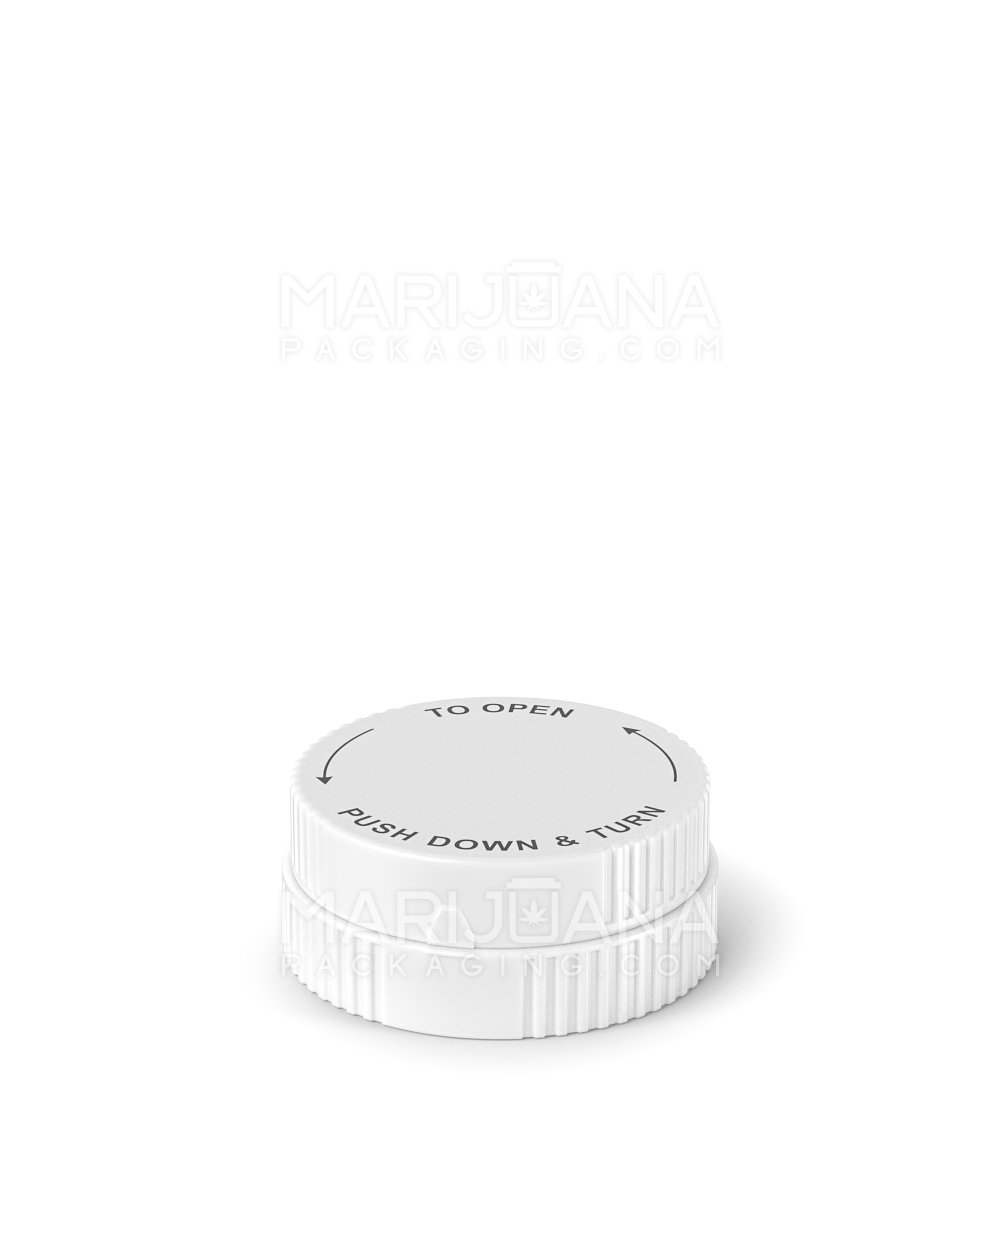 Child Resistant | Push & Turn Vial with Grinder Cap | 40dr - White Plastic - 150 Count - 9